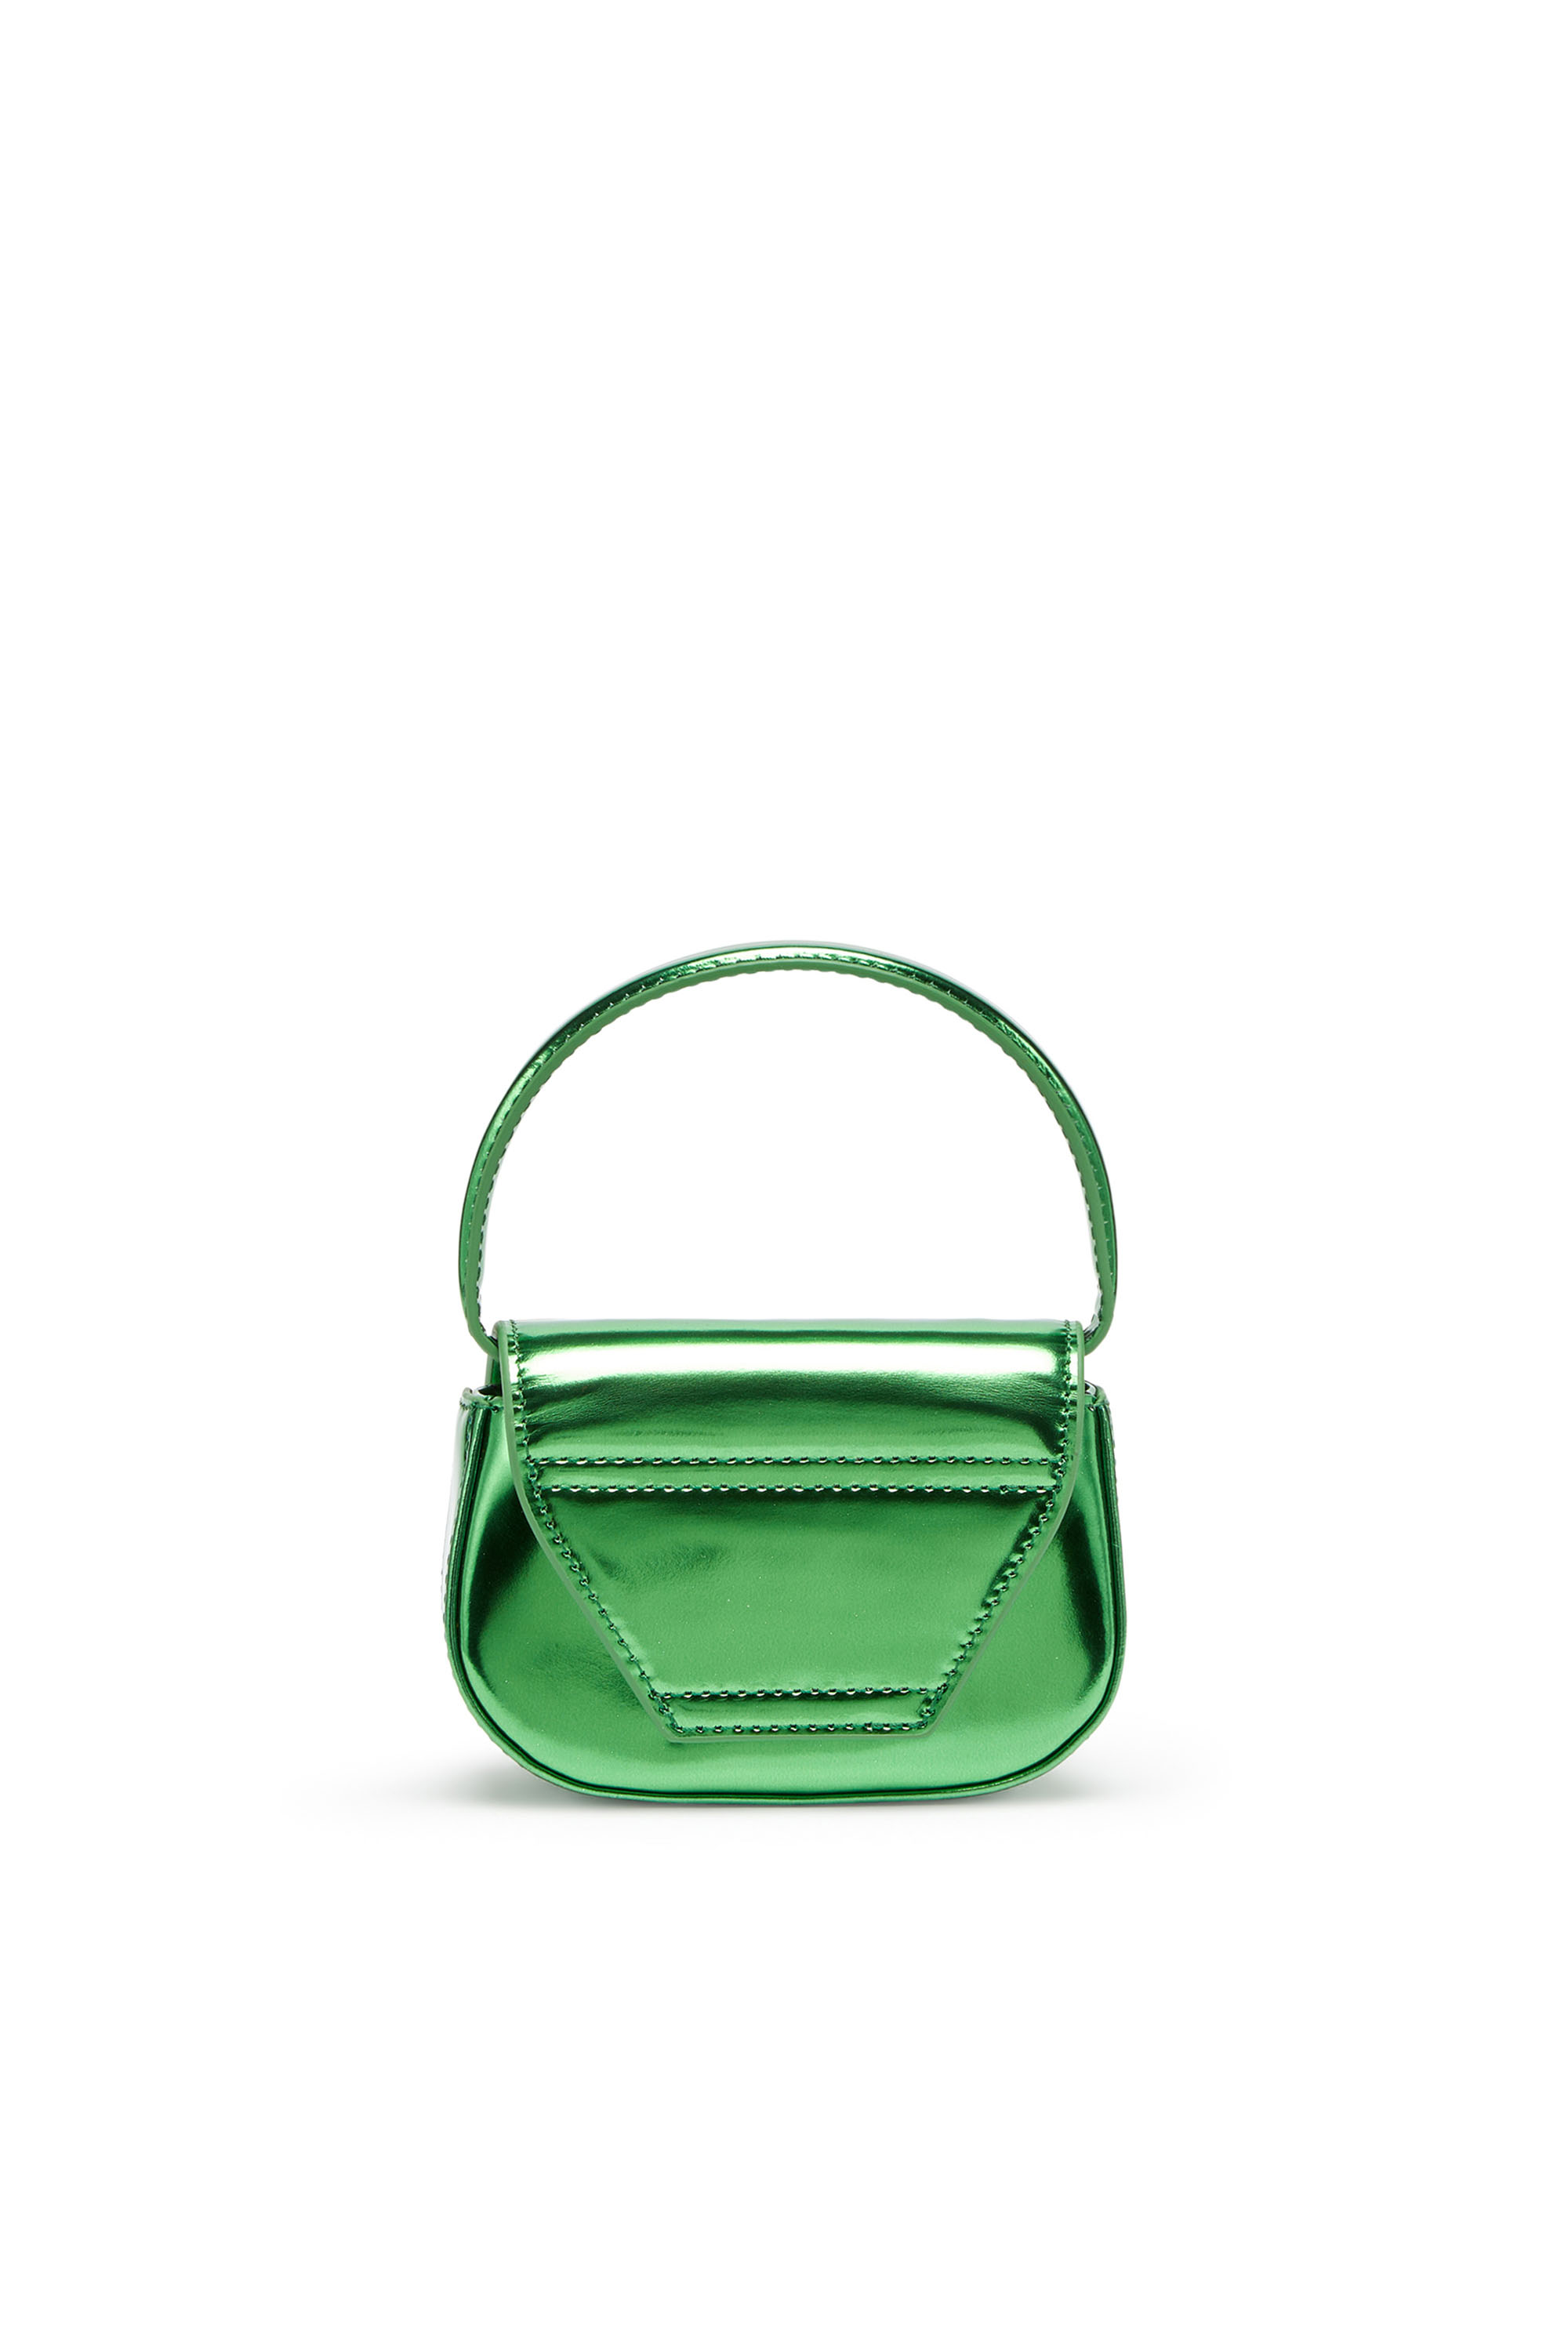 Diesel - 1DR-XS-S, Woman 1DR-XS-S-Iconic mini bag in mirrored leather in Green - Image 2